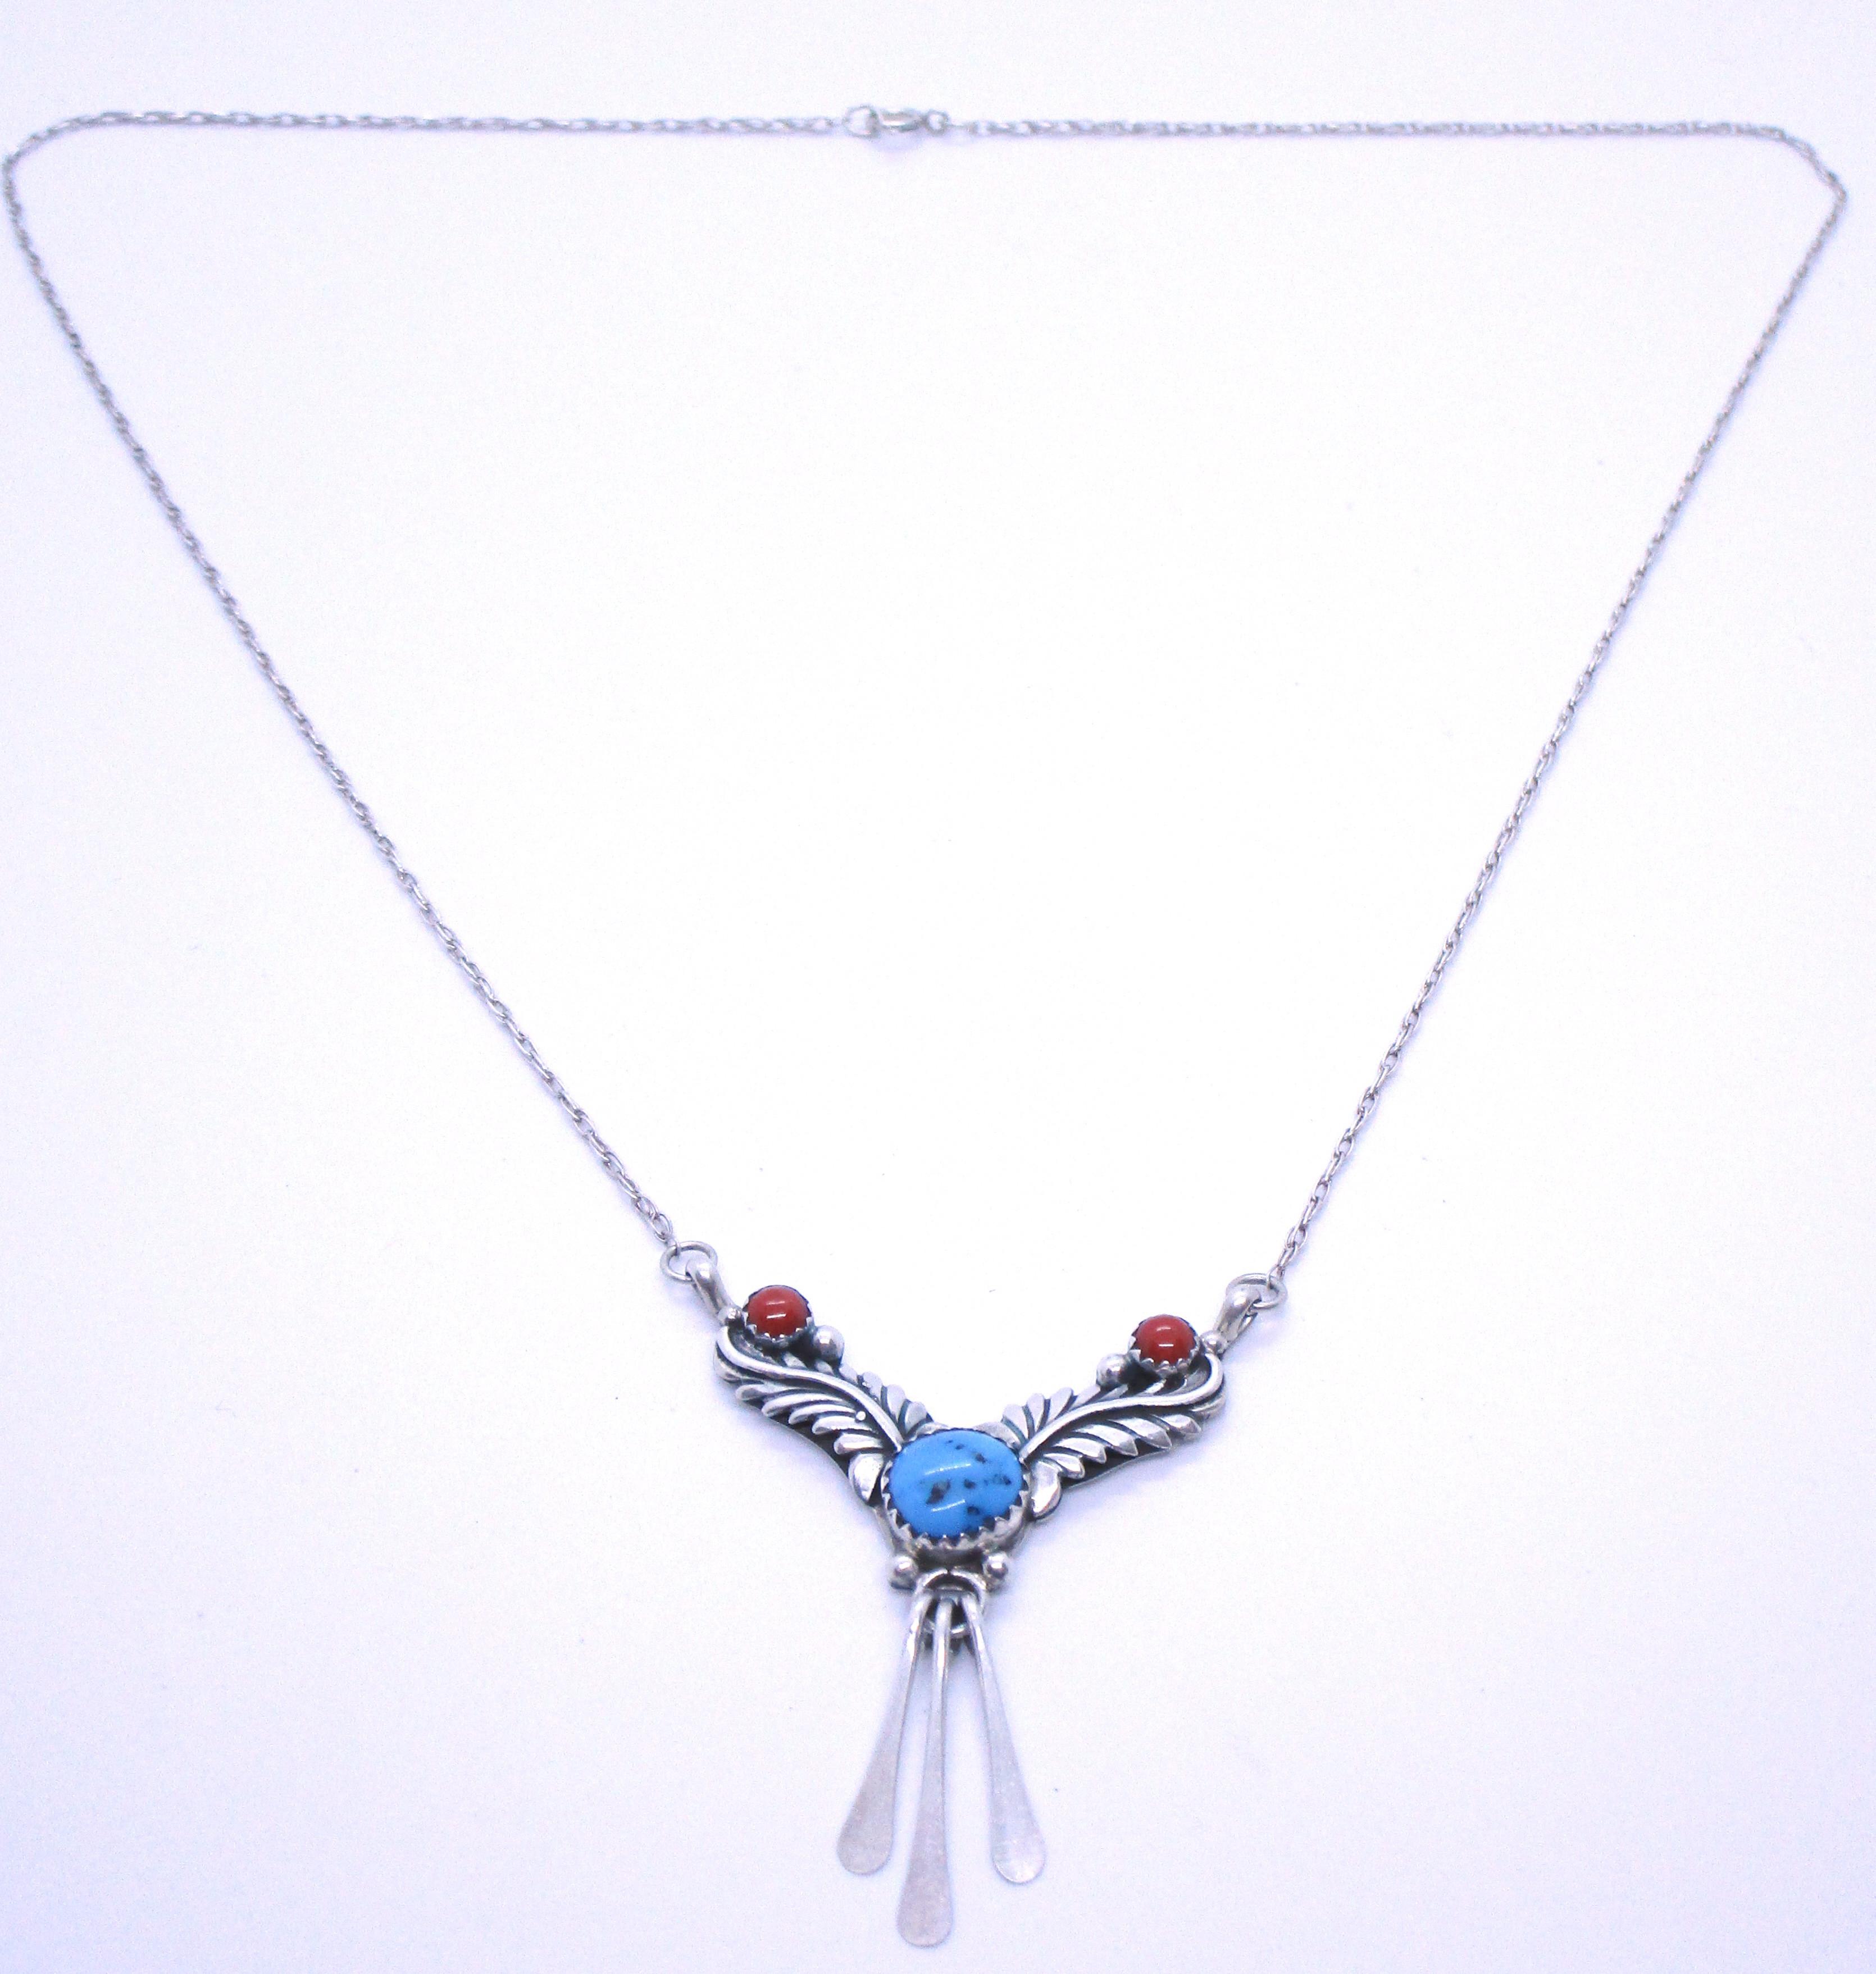 TURQUOISE & CORAL NECKLACE STERLING SILVER